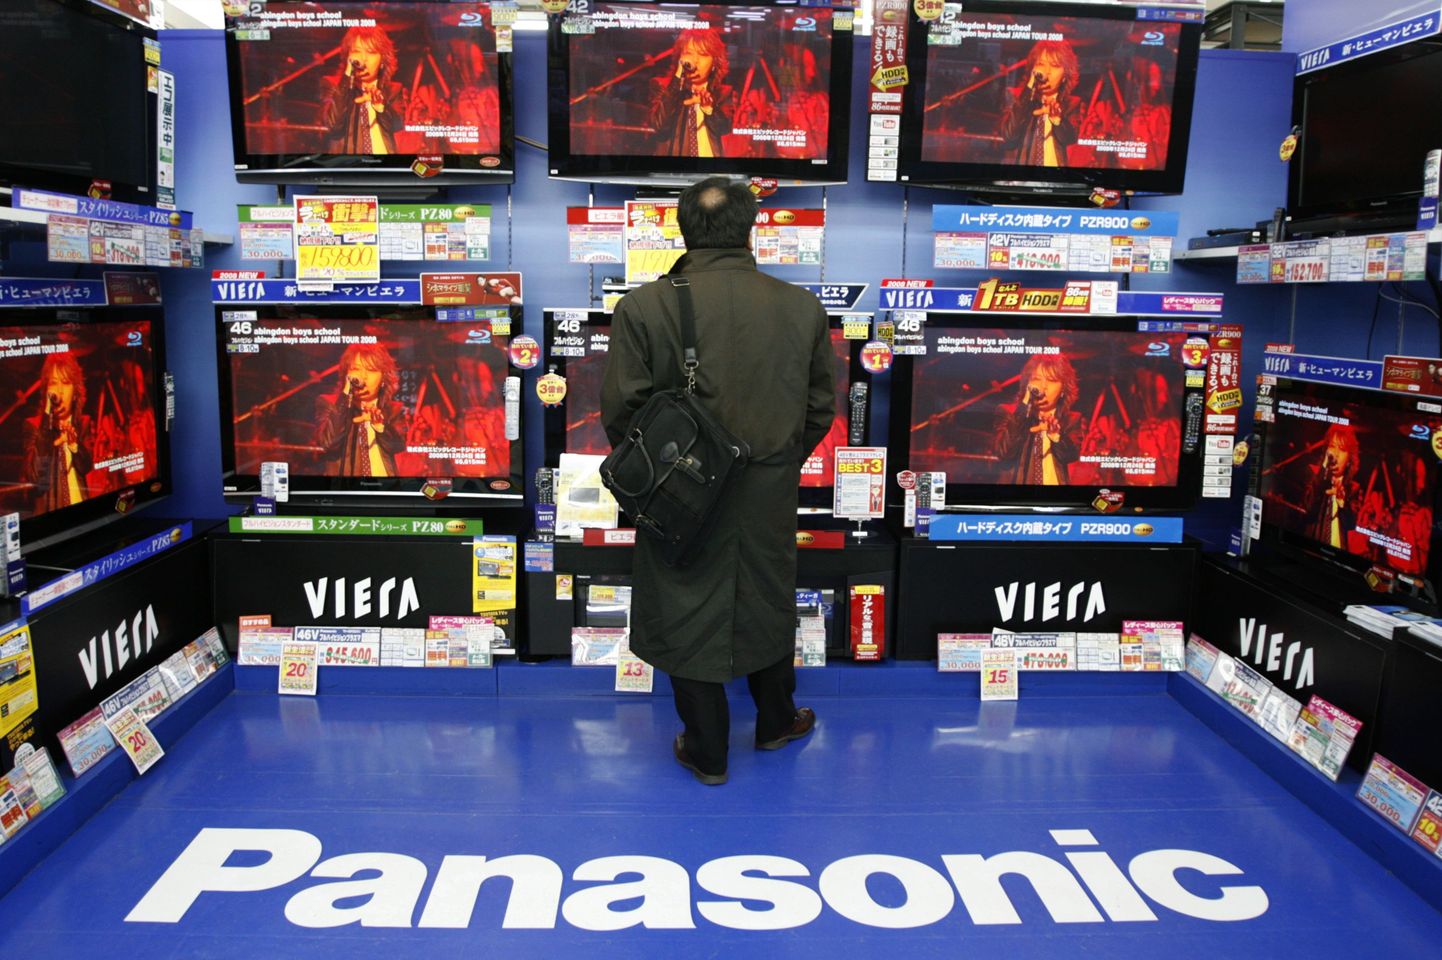 A man looks at Panasonic televisions displayed at an electronic shop in Tokyo January 28, 2009. Panasonic shares climbed 2.4 percent to 1,118 yen after the world's No.1 plasma TV maker warned it would post an annual loss of $4.2 billion and said it would cut 15,000 jobs as it grapples with a stronger yen and slowing demand.  REUTERS/Yuriko Nakao (JAPAN)